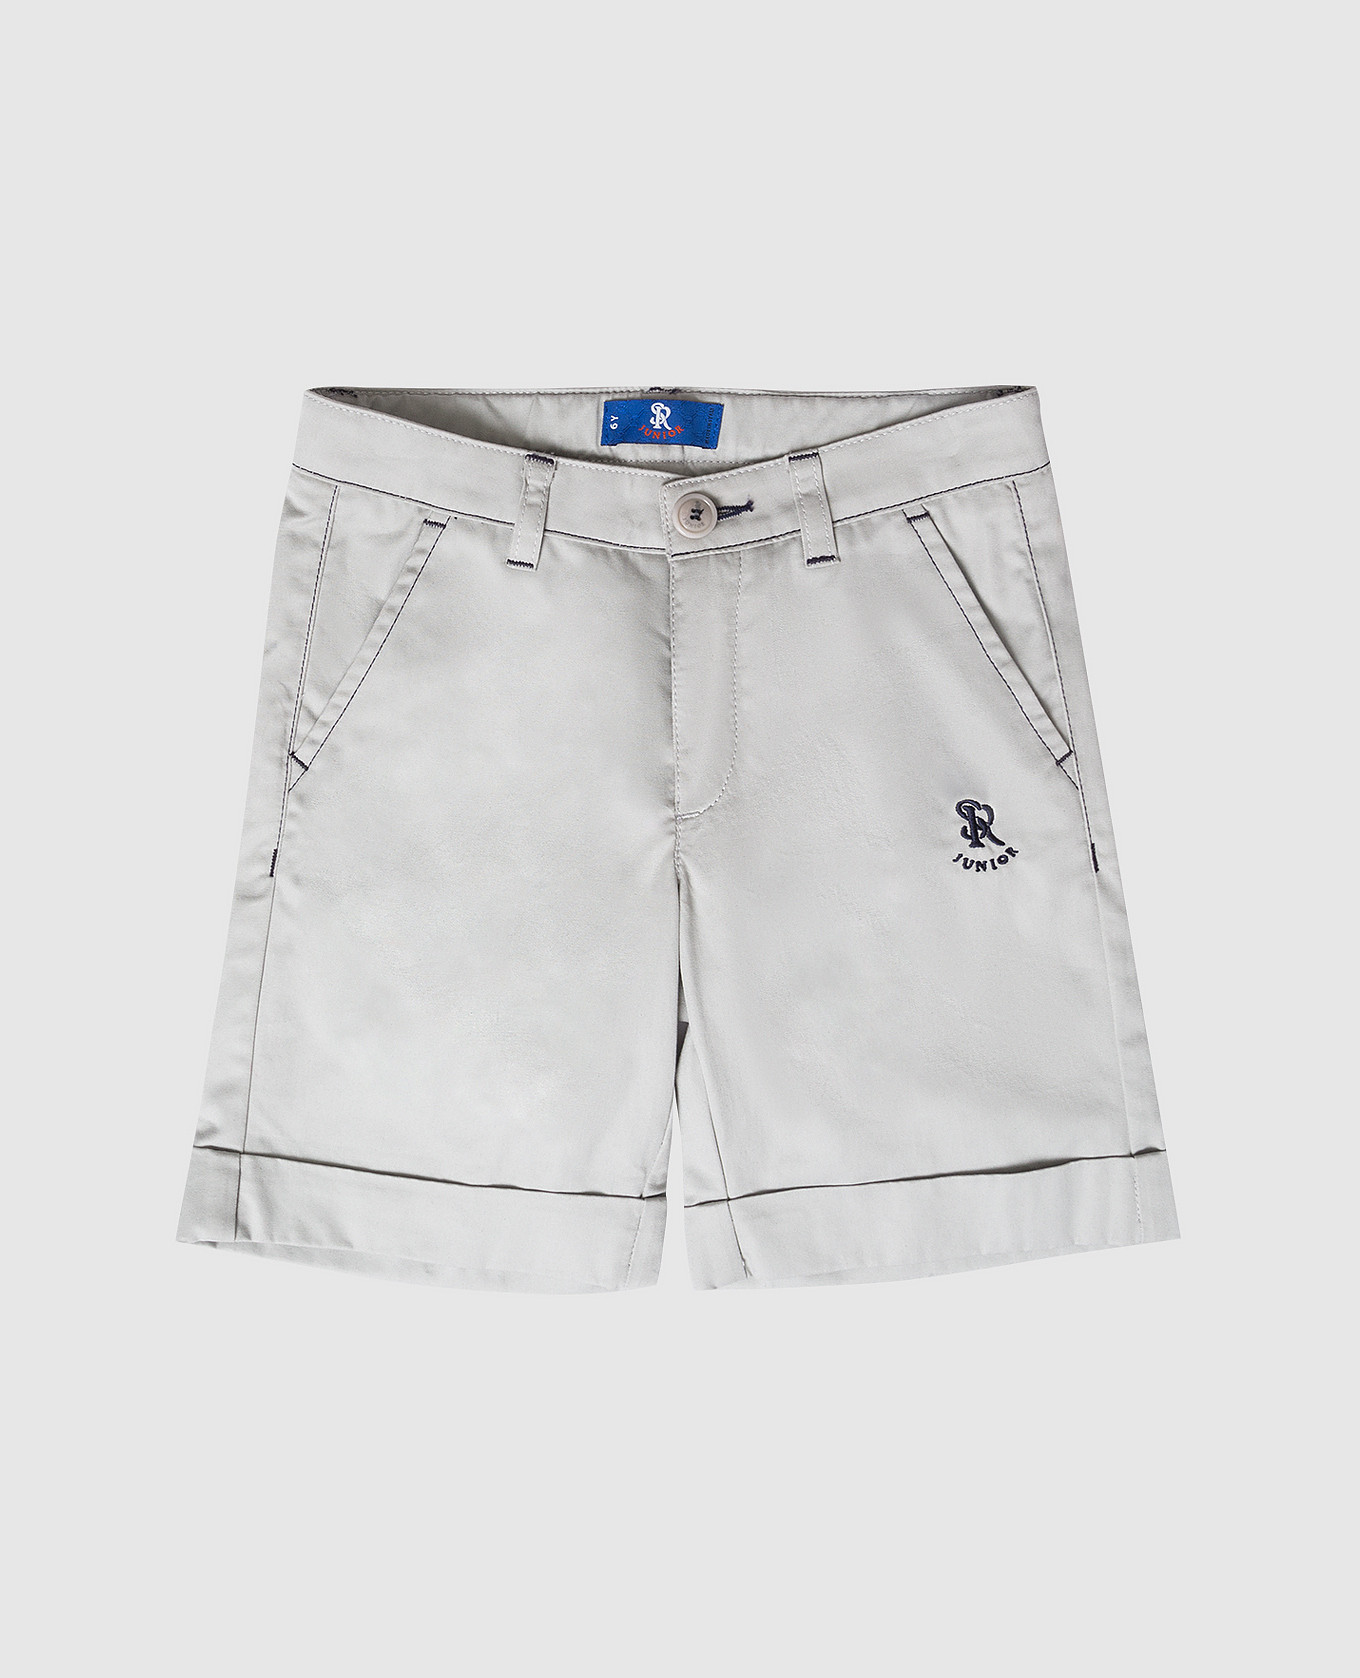 Children's gray shorts with logo embroidery